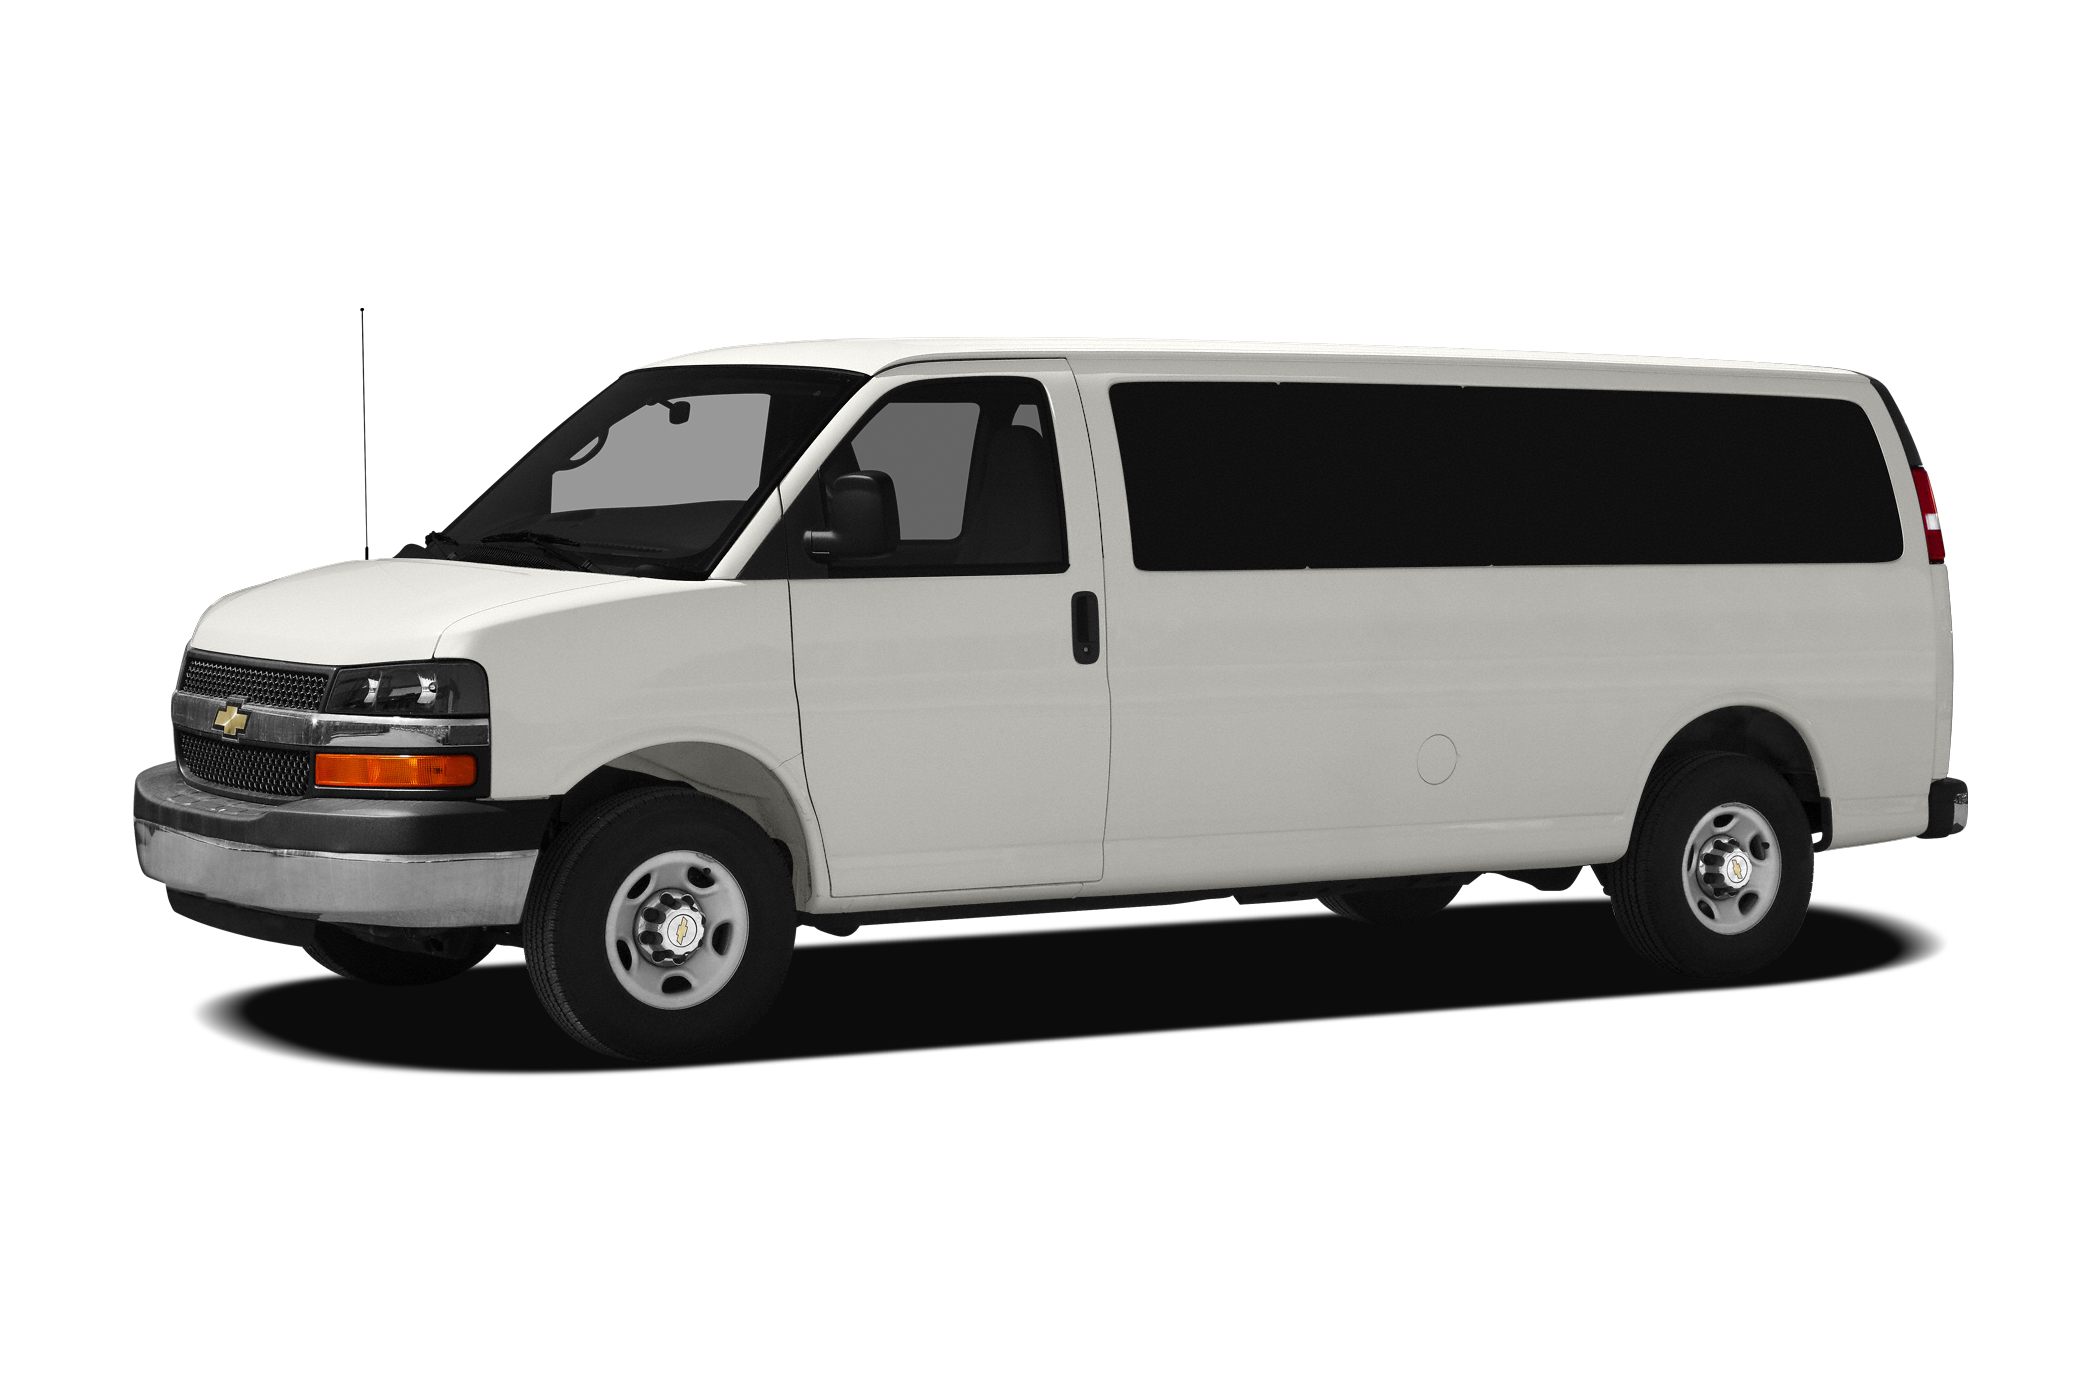 2011 Chevrolet Express 2500 Specs and 